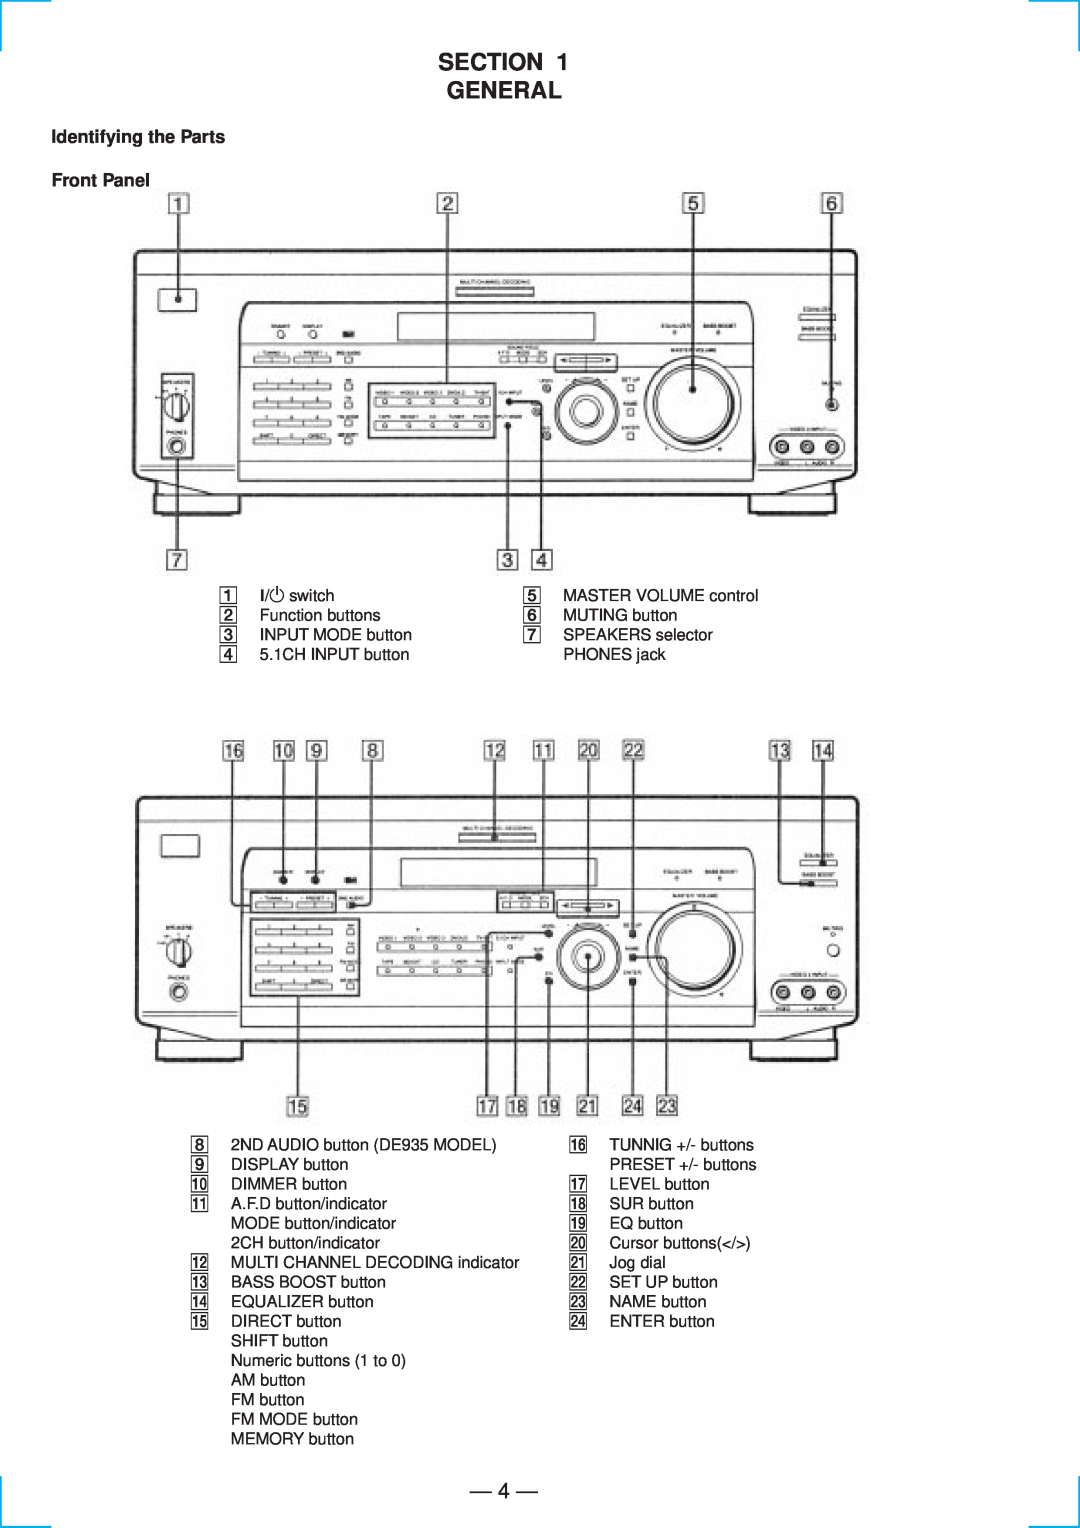 Sony STR-DE835 specifications Section General, 4, Identifying the Parts Front Panel 